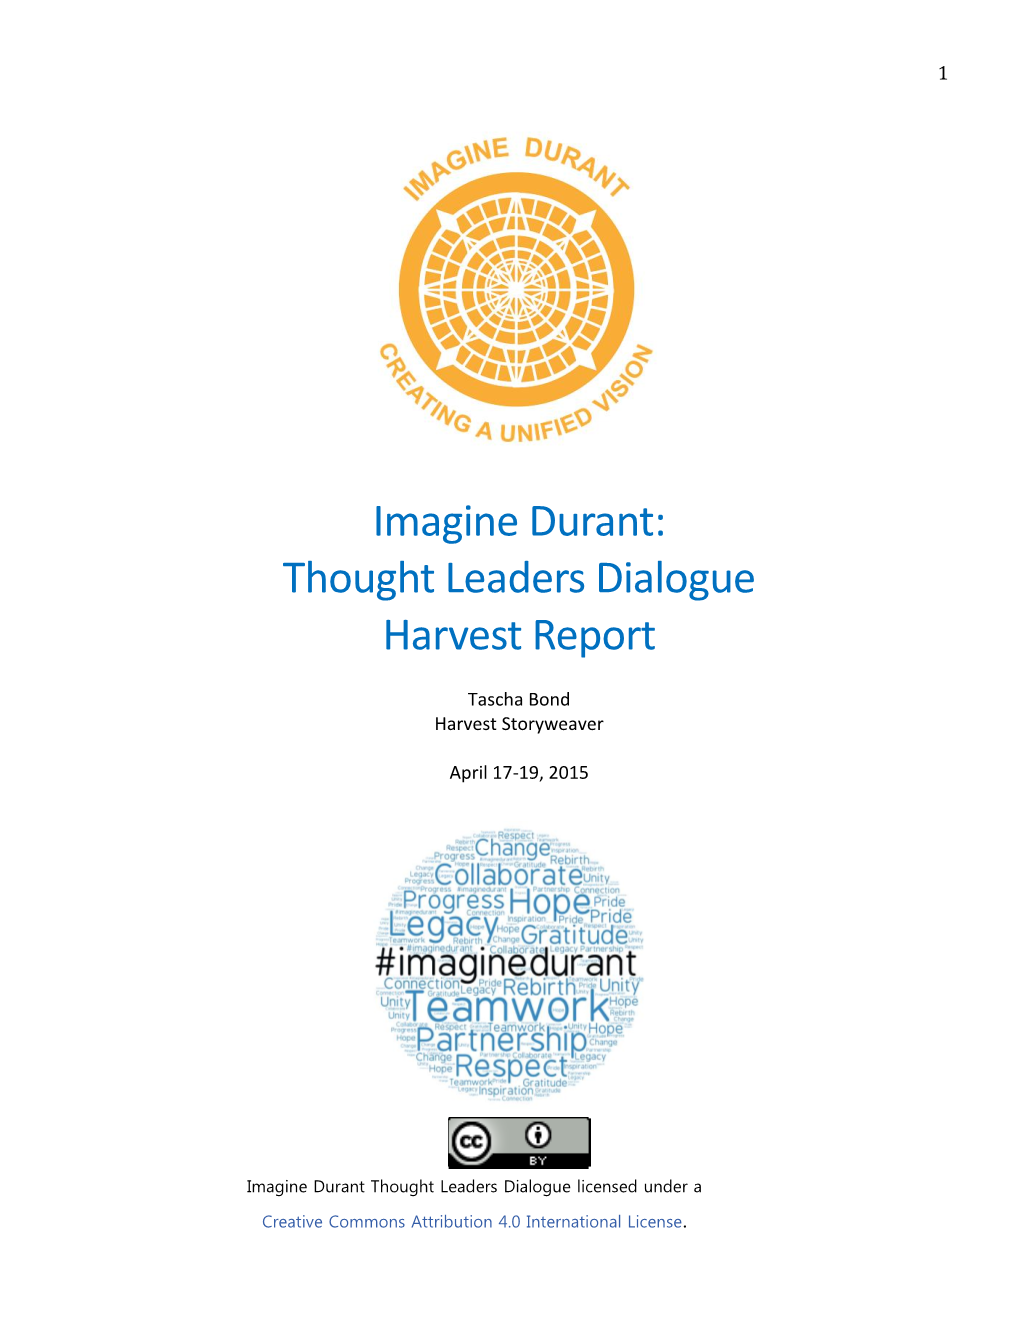 Imagine Durant: Thought Leaders Dialogue Harvest Report